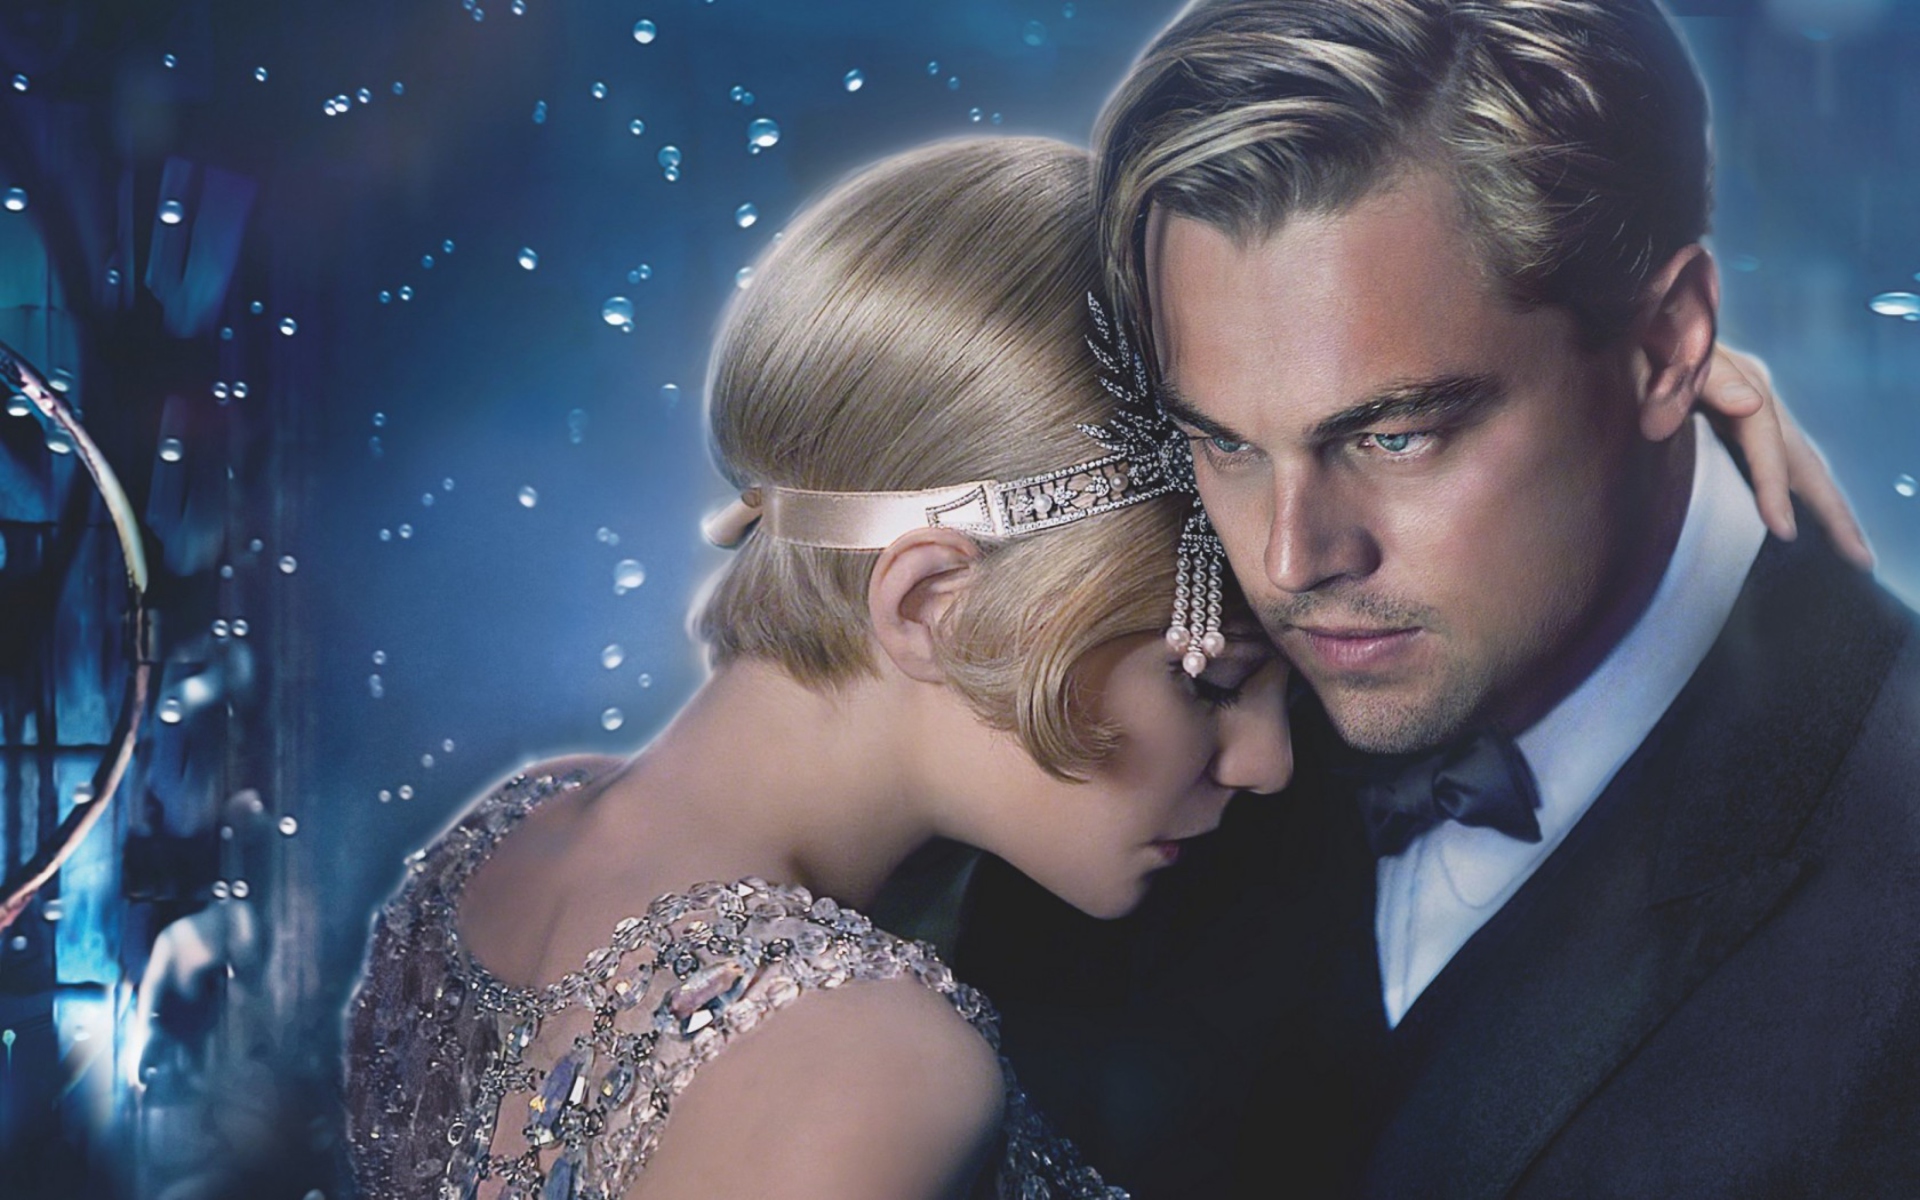 The Great Gatsby wallpaper 1920x1200